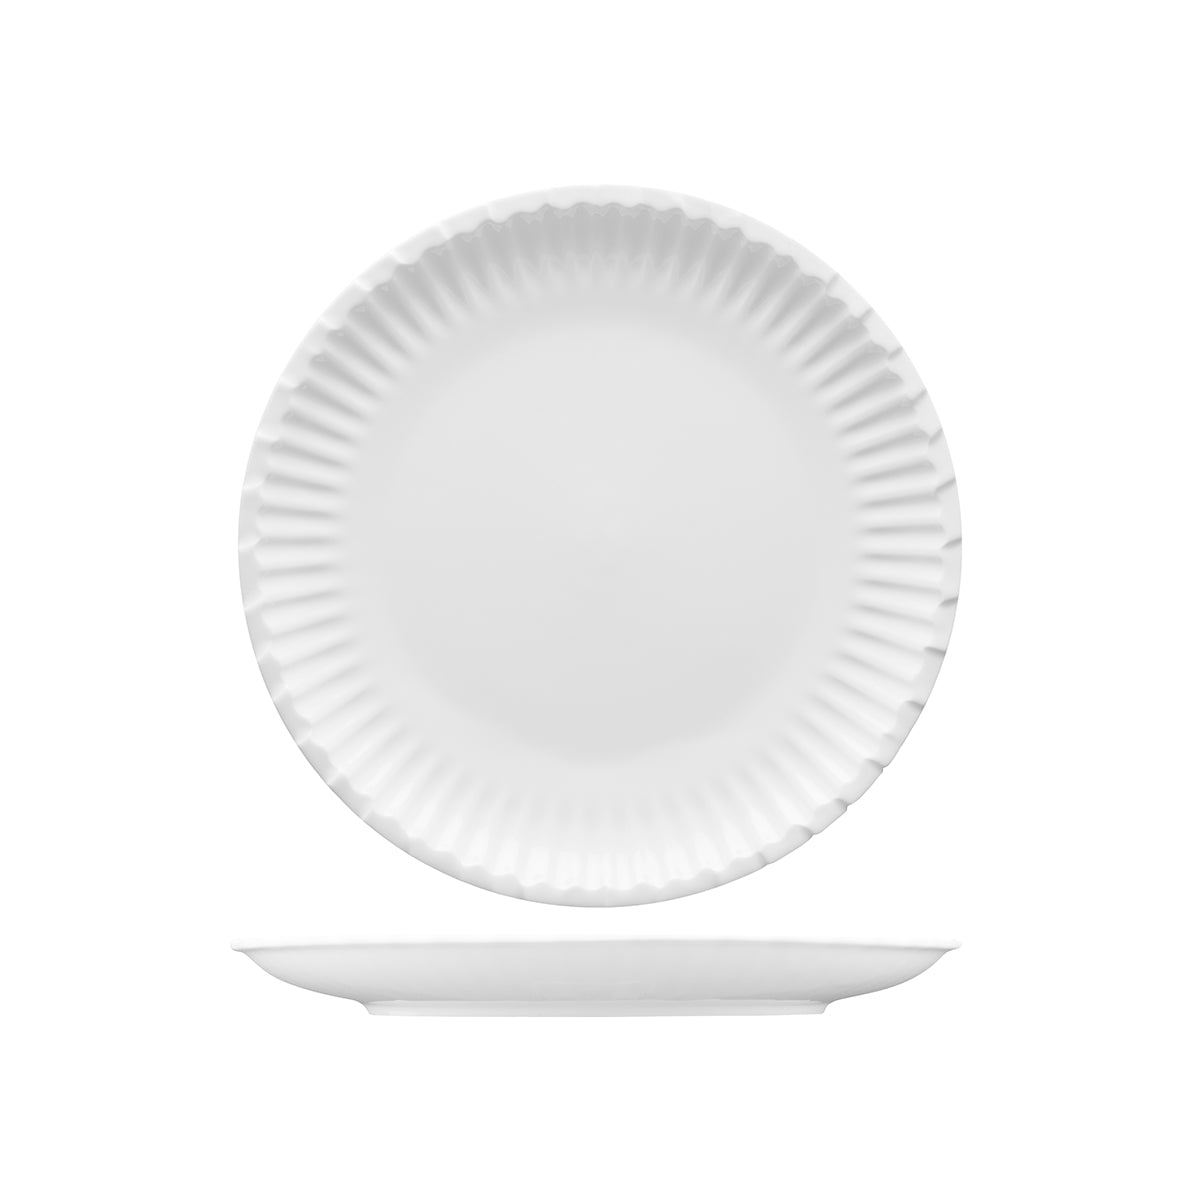 Paper Look Plate - 254mm, Fortessa Food Truck from Fortessa. made out of Ceramic and sold in boxes of 4. Hospitality quality at wholesale price with The Flying Fork! 